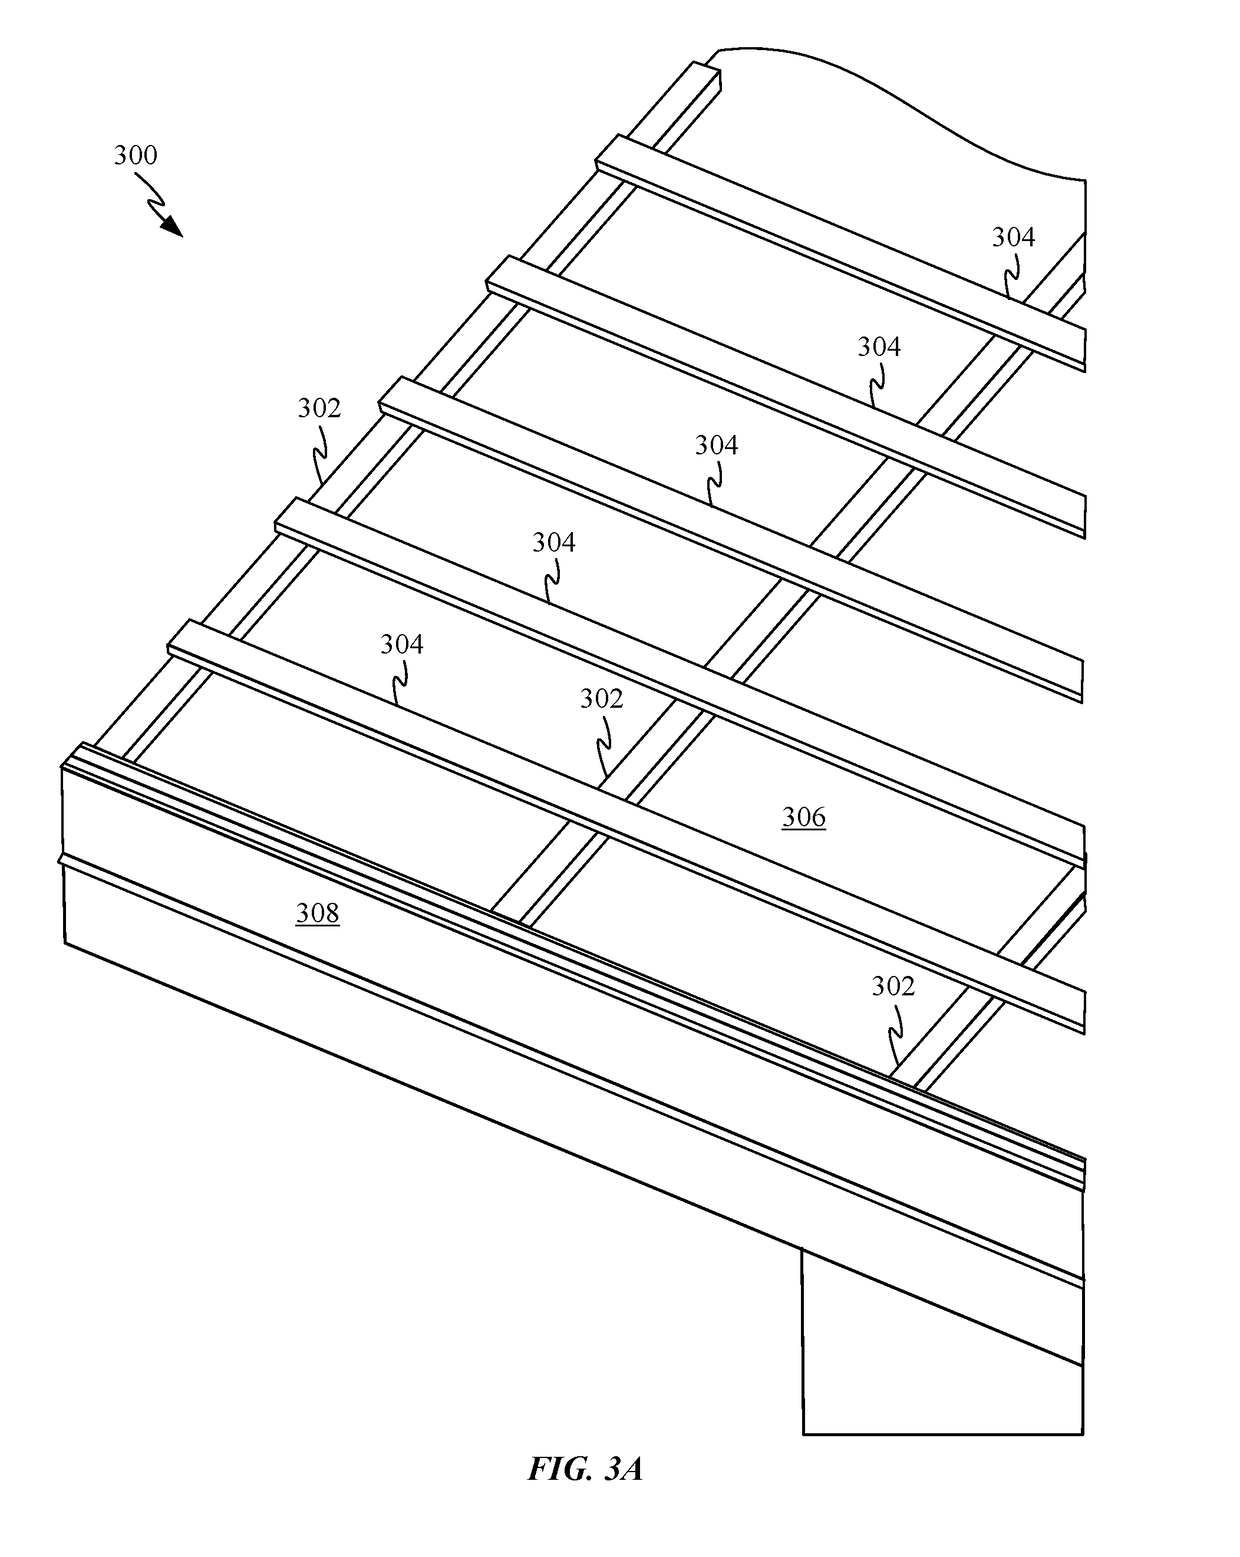 Sidelap interconnect for photovoltaic roofing modules